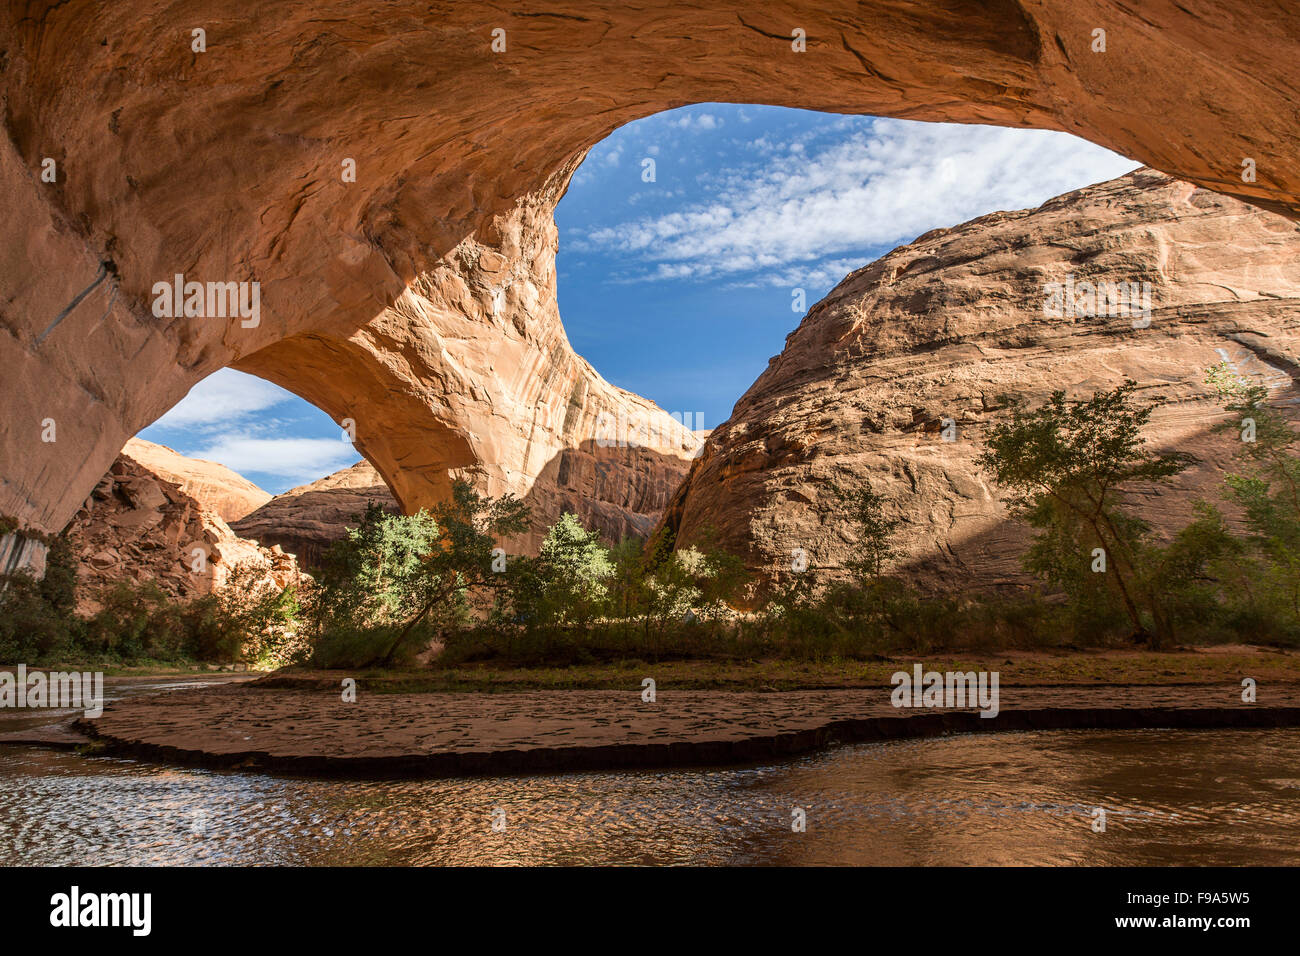 A large natural arch spans over a canyon with running water in the desert. Stock Photo